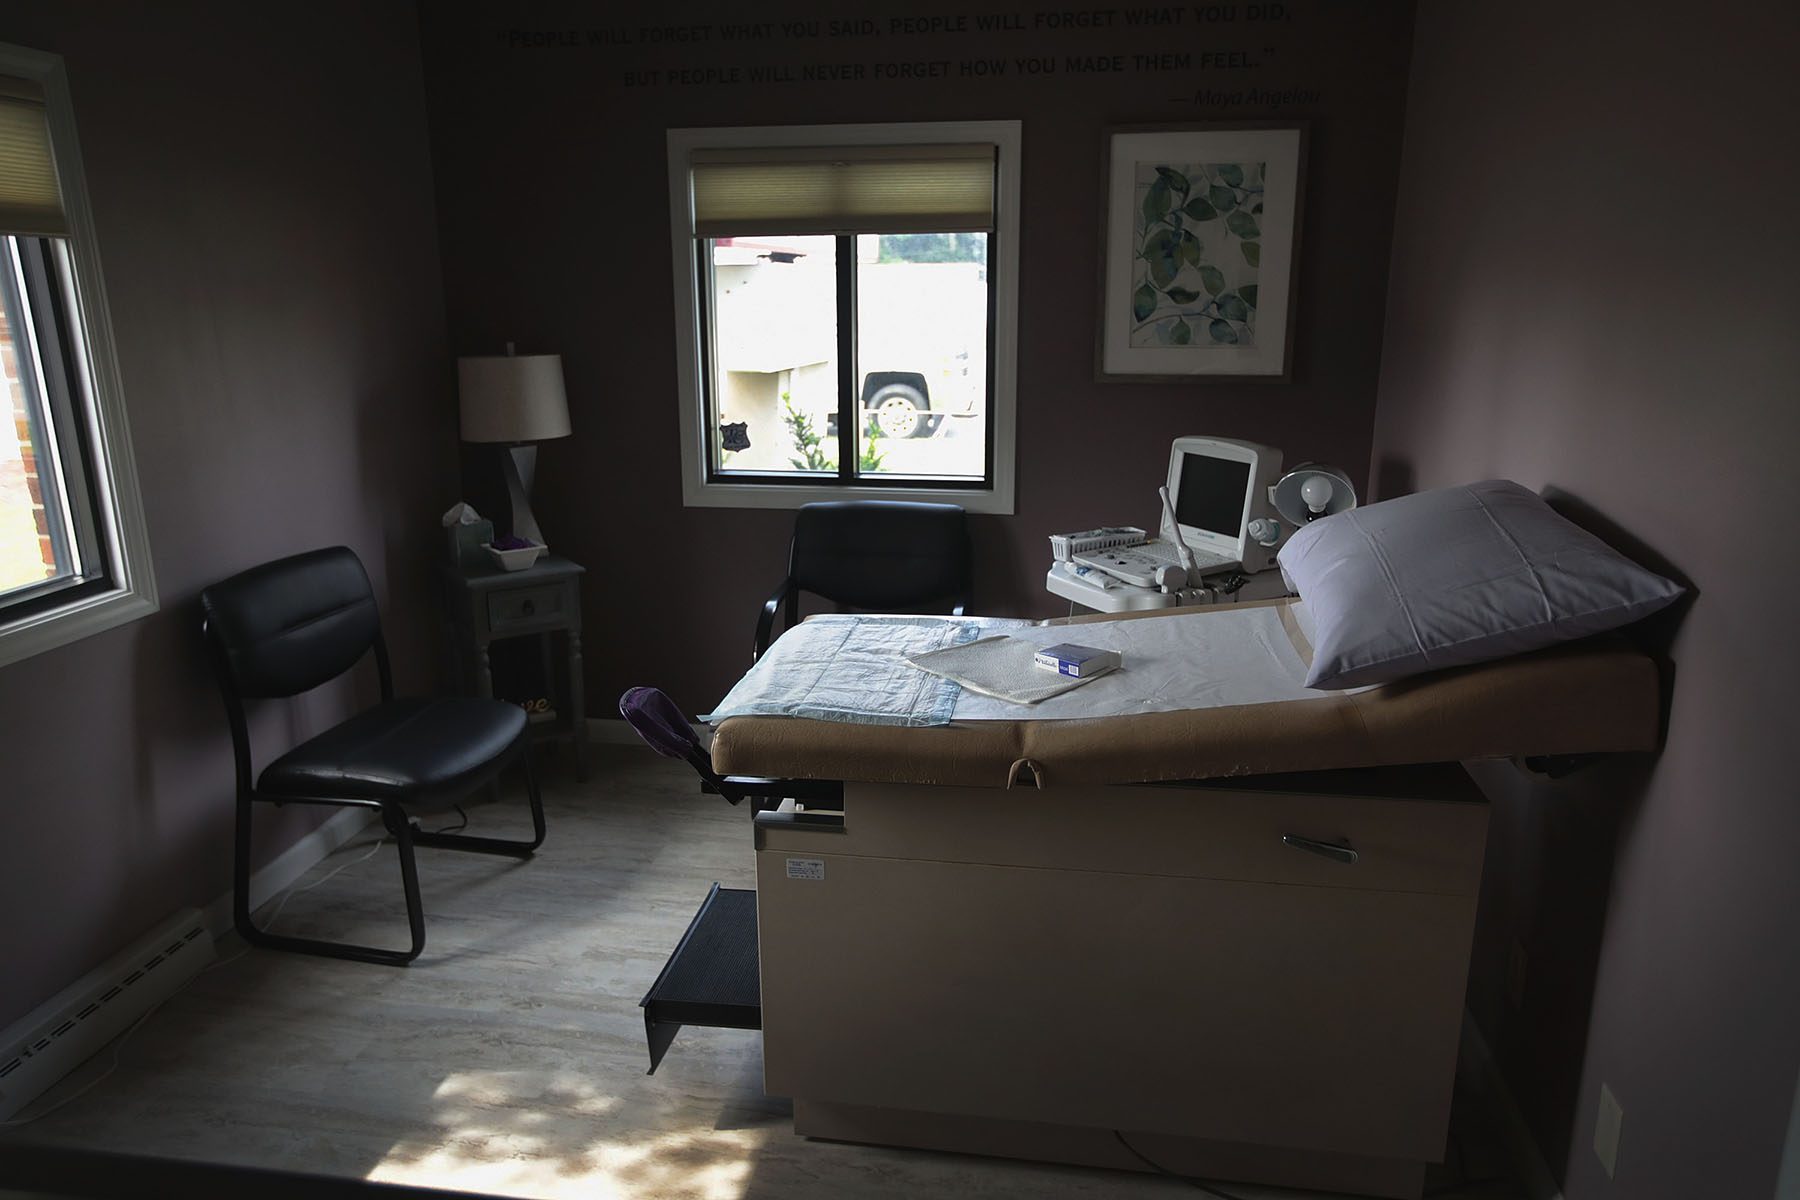 An ultrasound machine sits next to an exam table in an examination room.